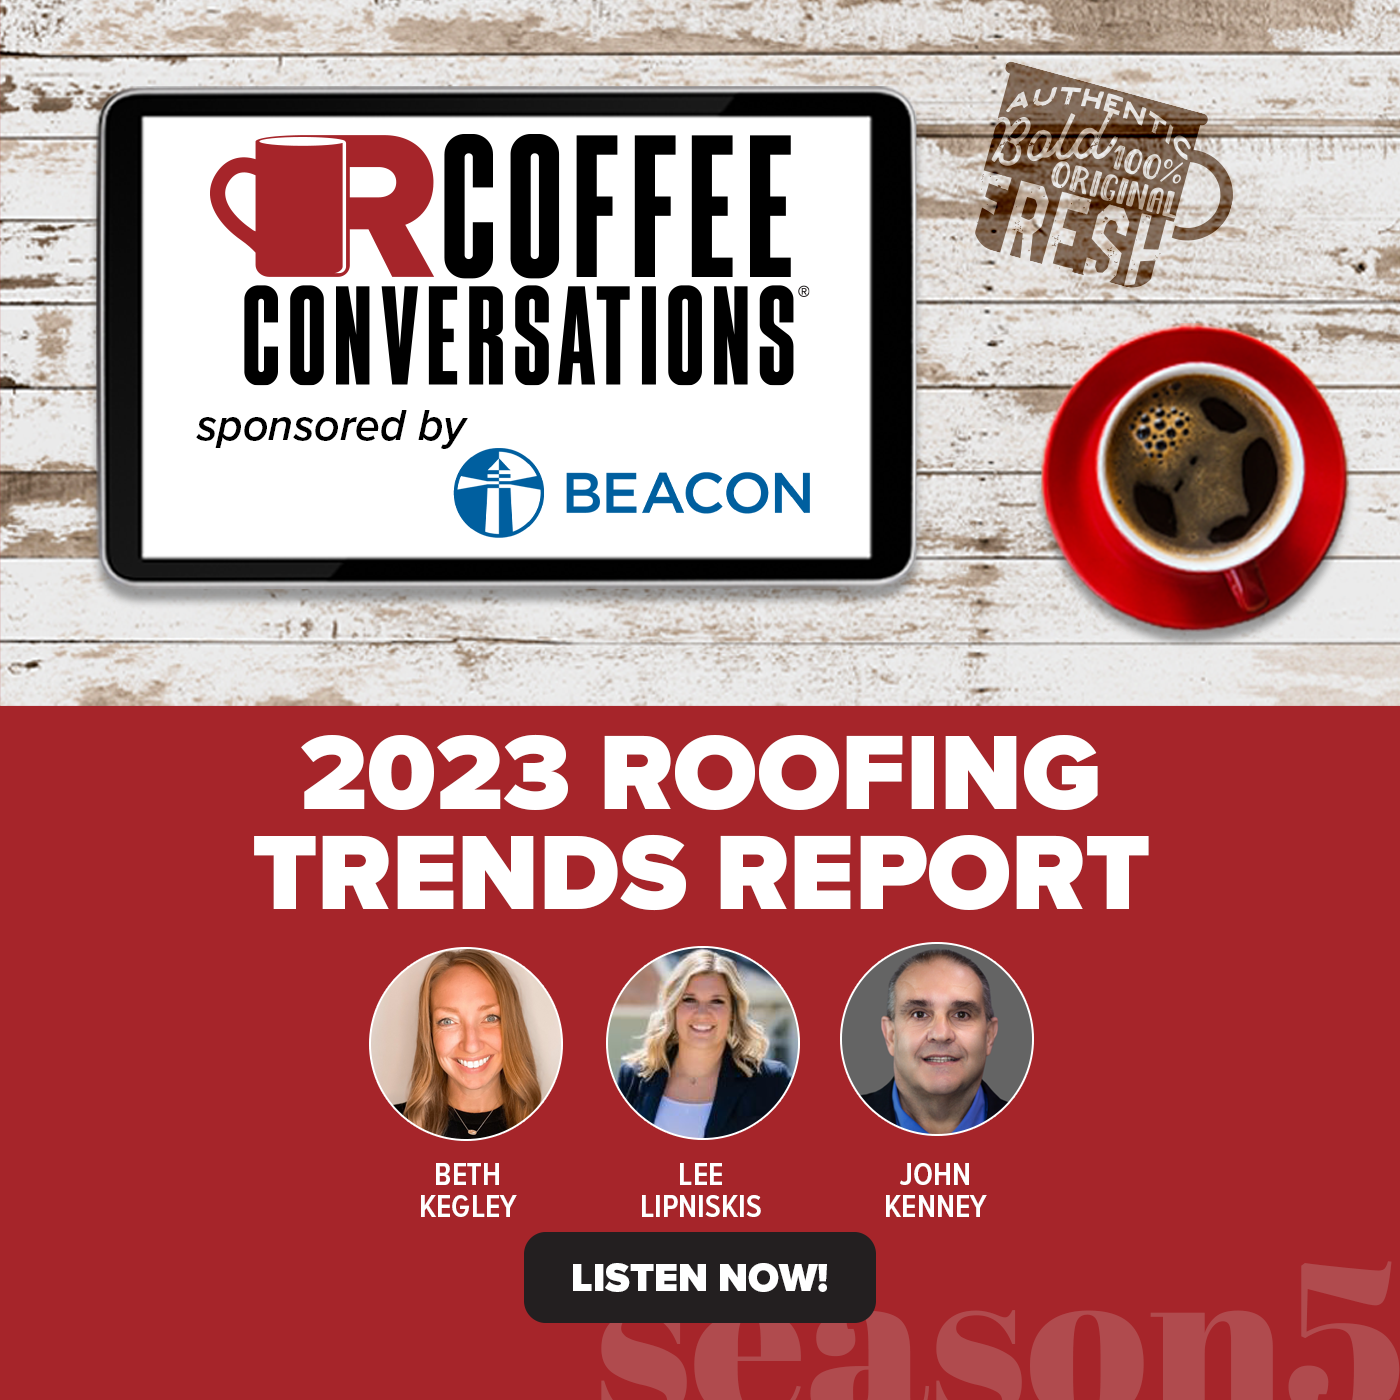 beacon - Unveiling the 2023 Roofing Trends Report - Sponsored by Beacon! - POD